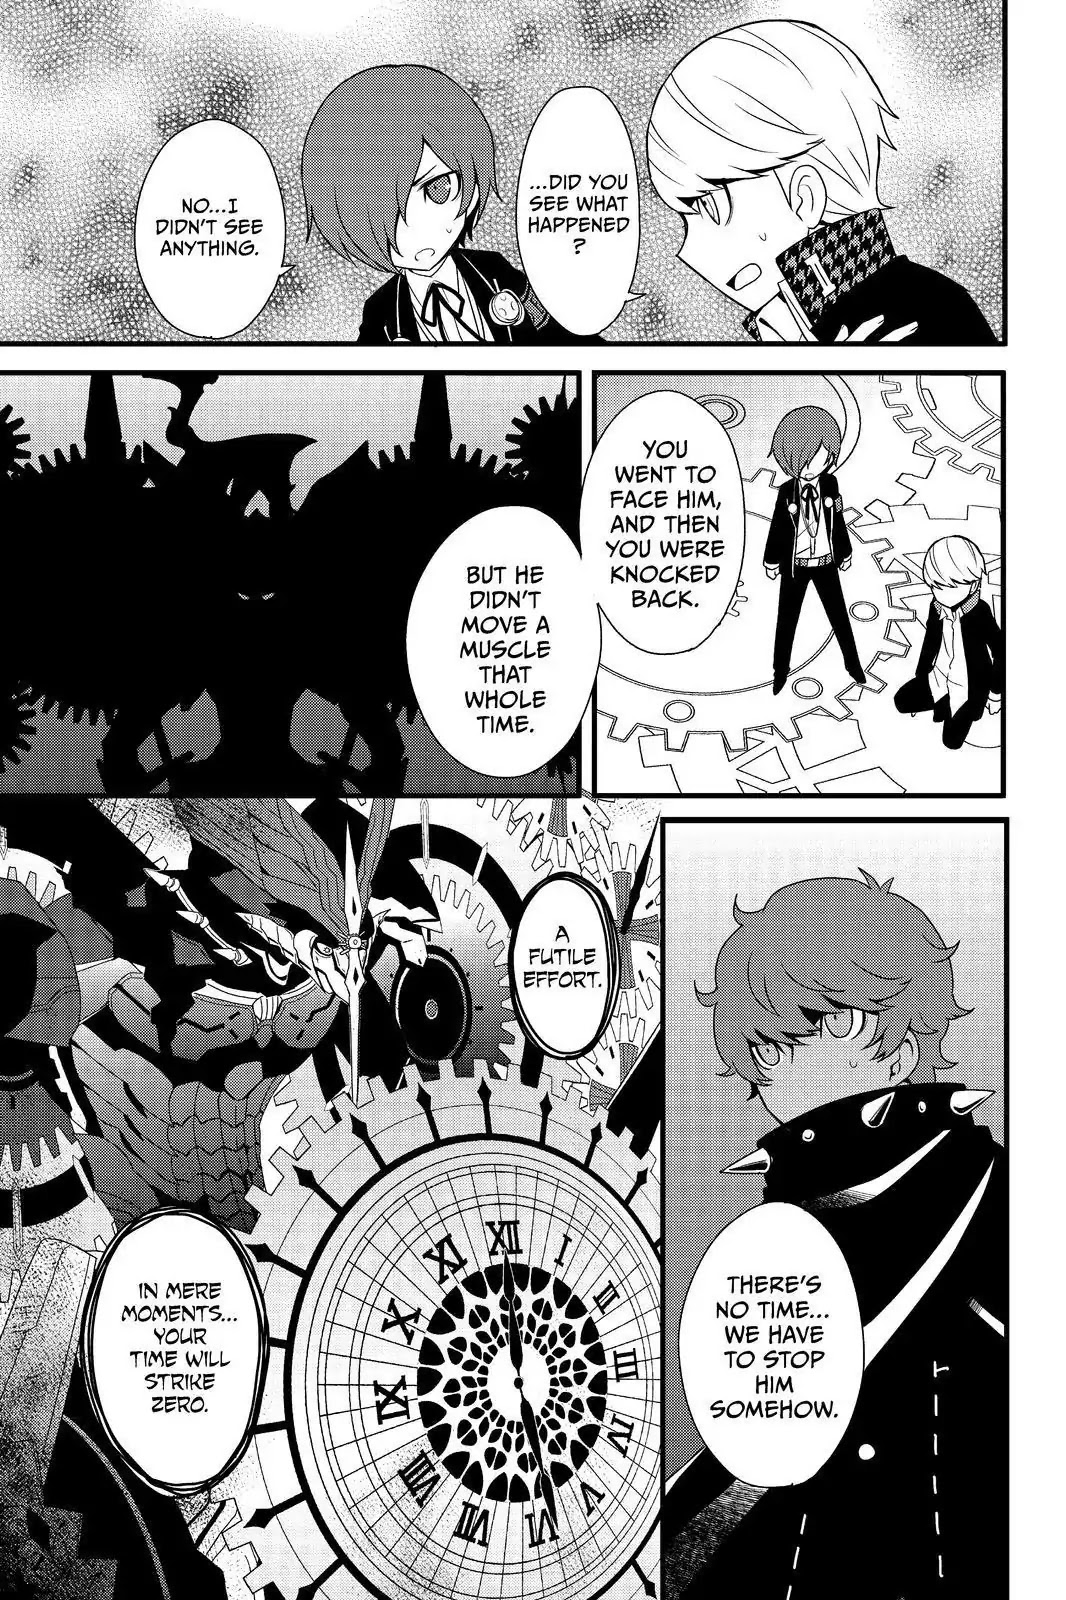 Persona Q - Shadow Of The Labyrinth - Side: P4 Chapter 23 #11